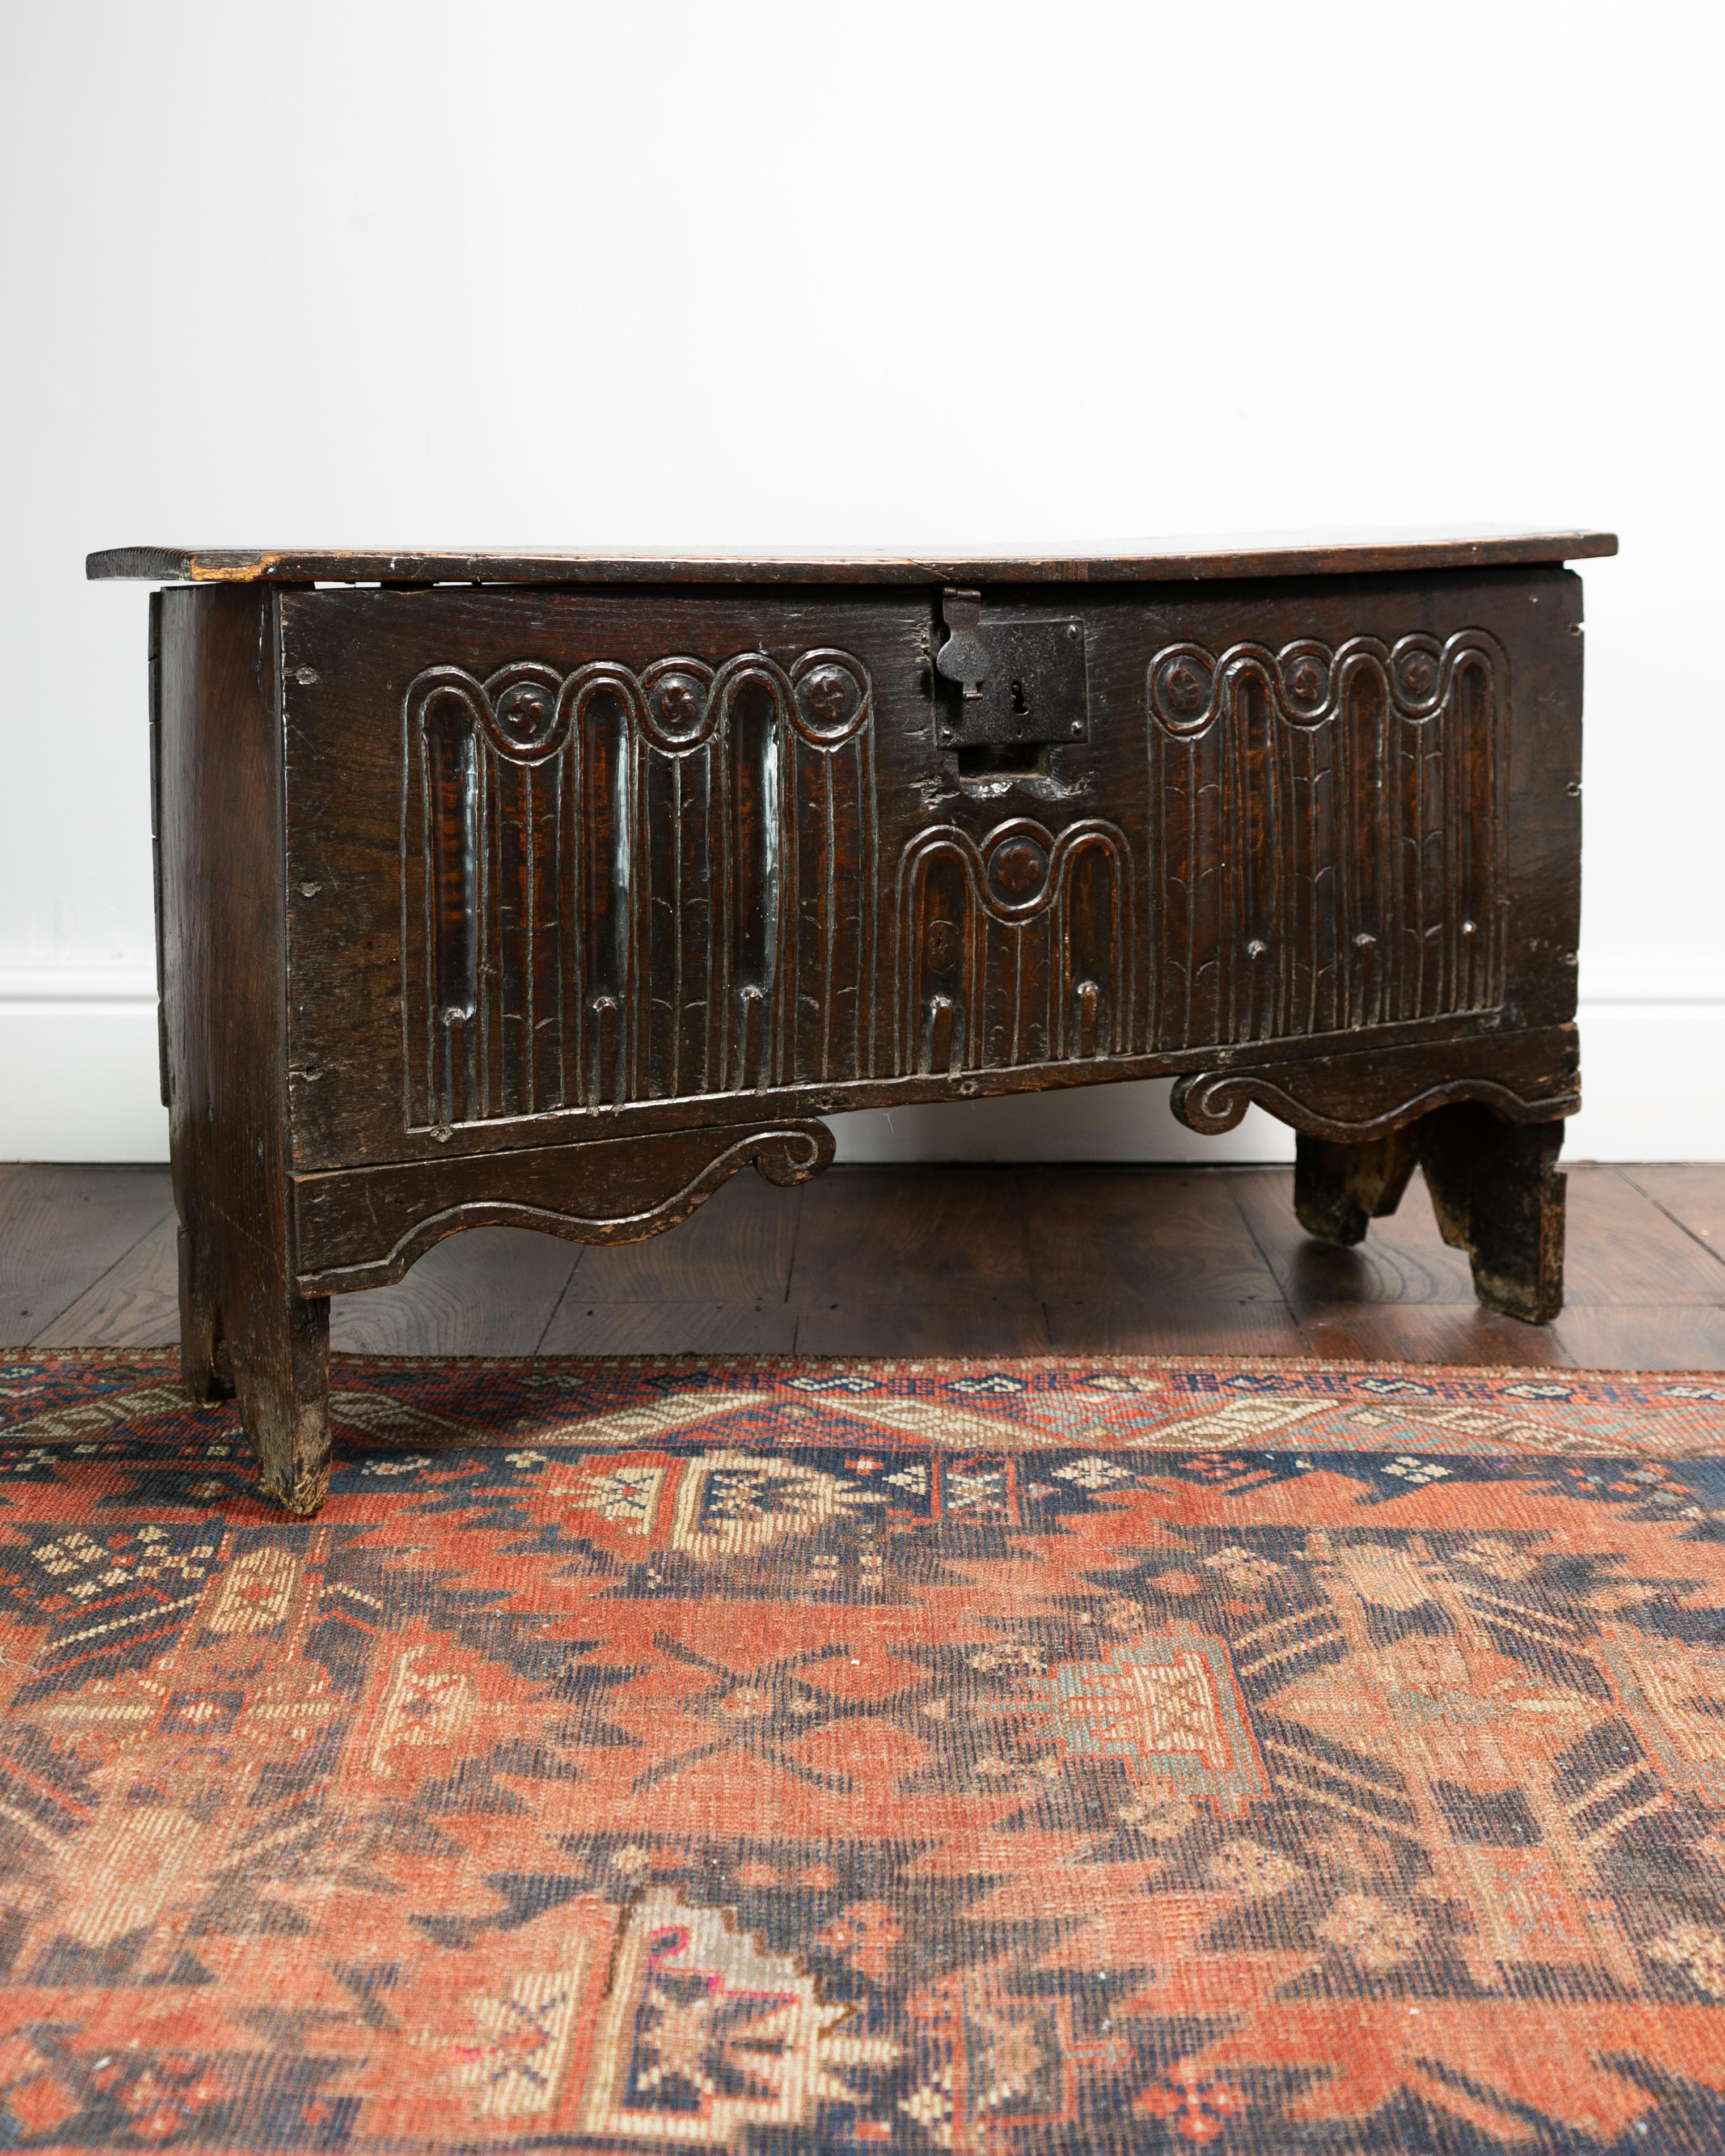 British 17th Century, James I, Carved Boarded Oak Chest, England, Circa 1603 - 1625 For Sale